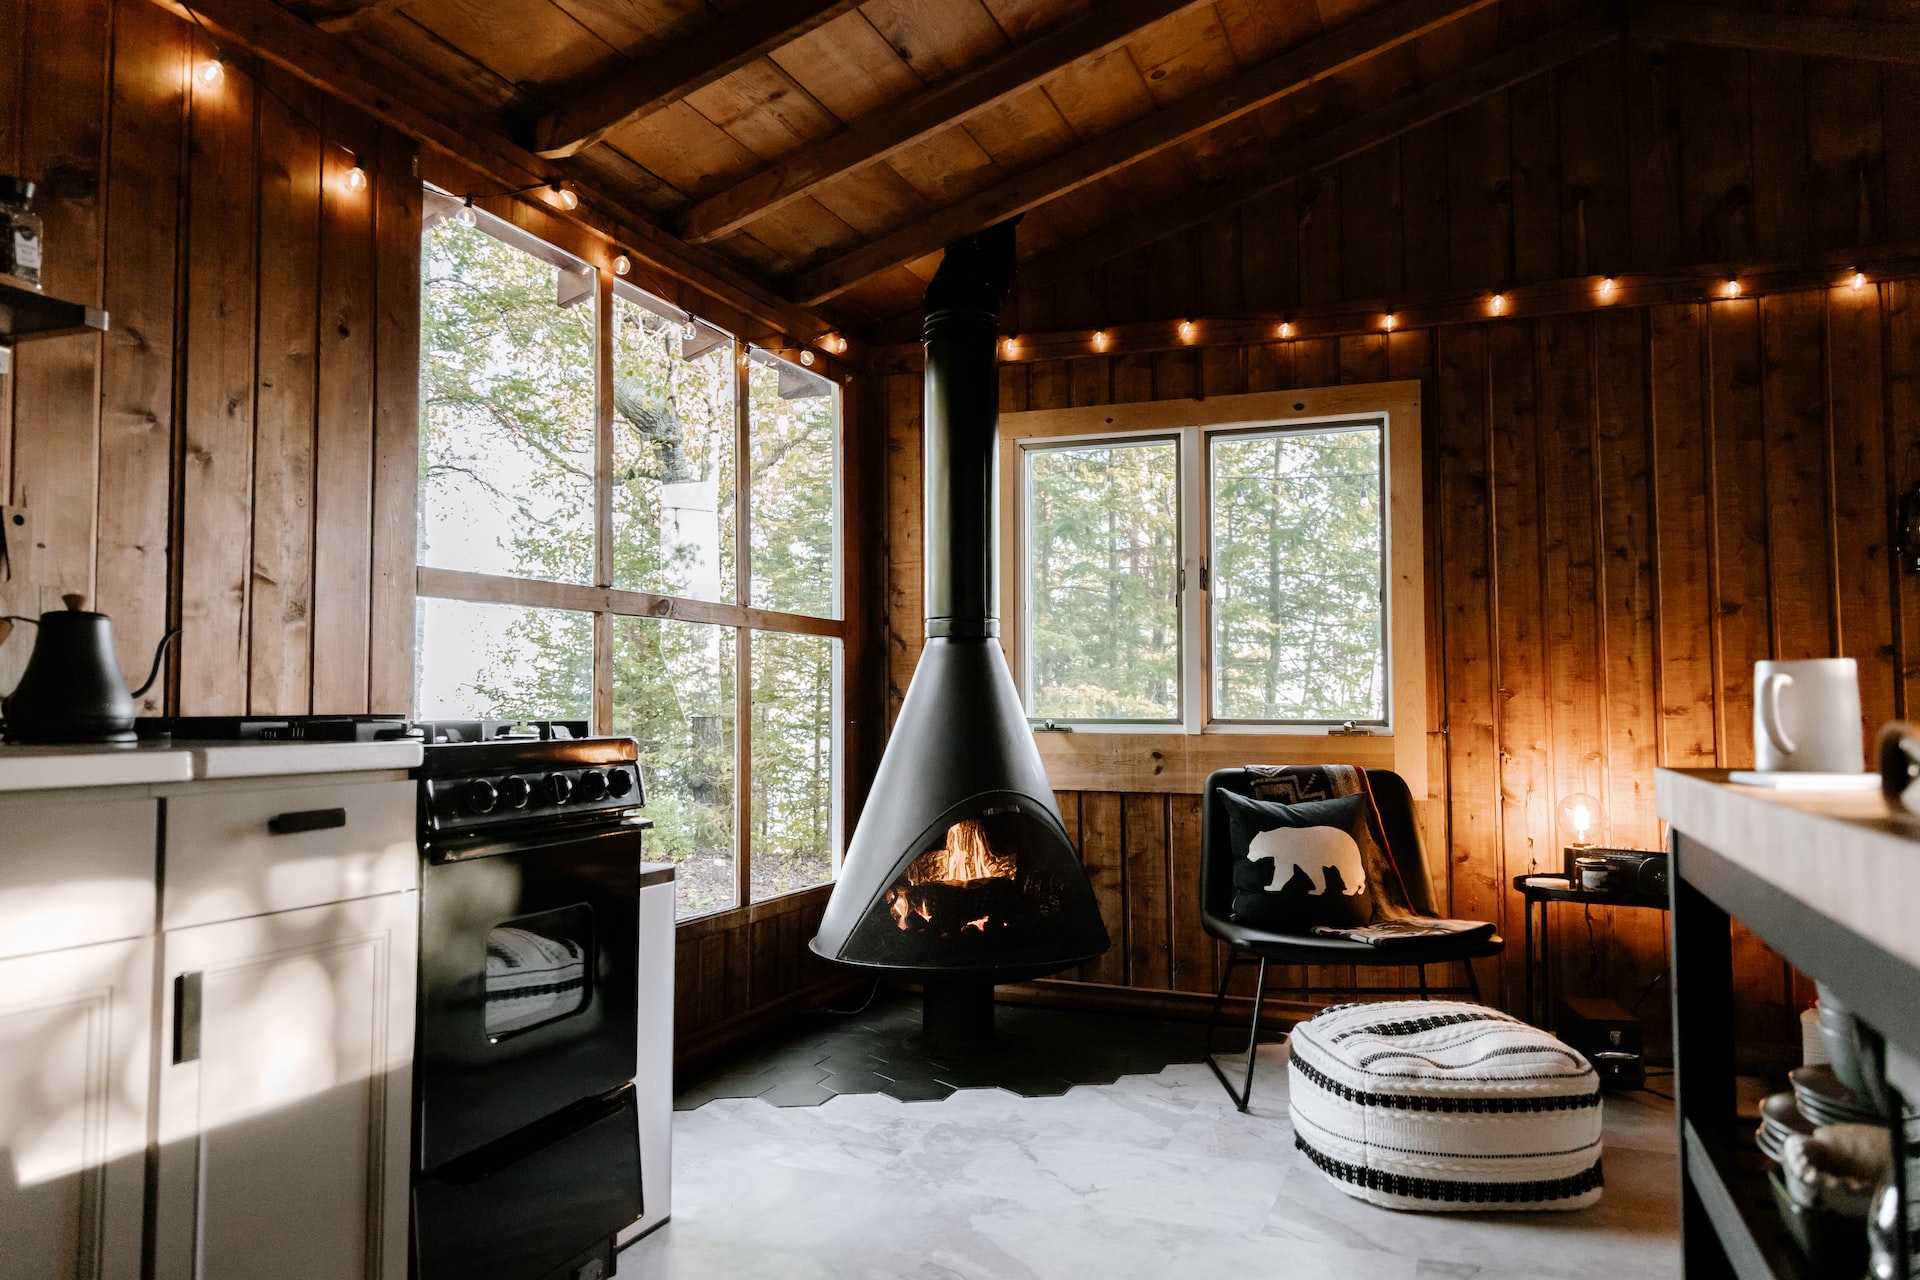 A modern interior of a high end cabin with a wood burning stove in the center.